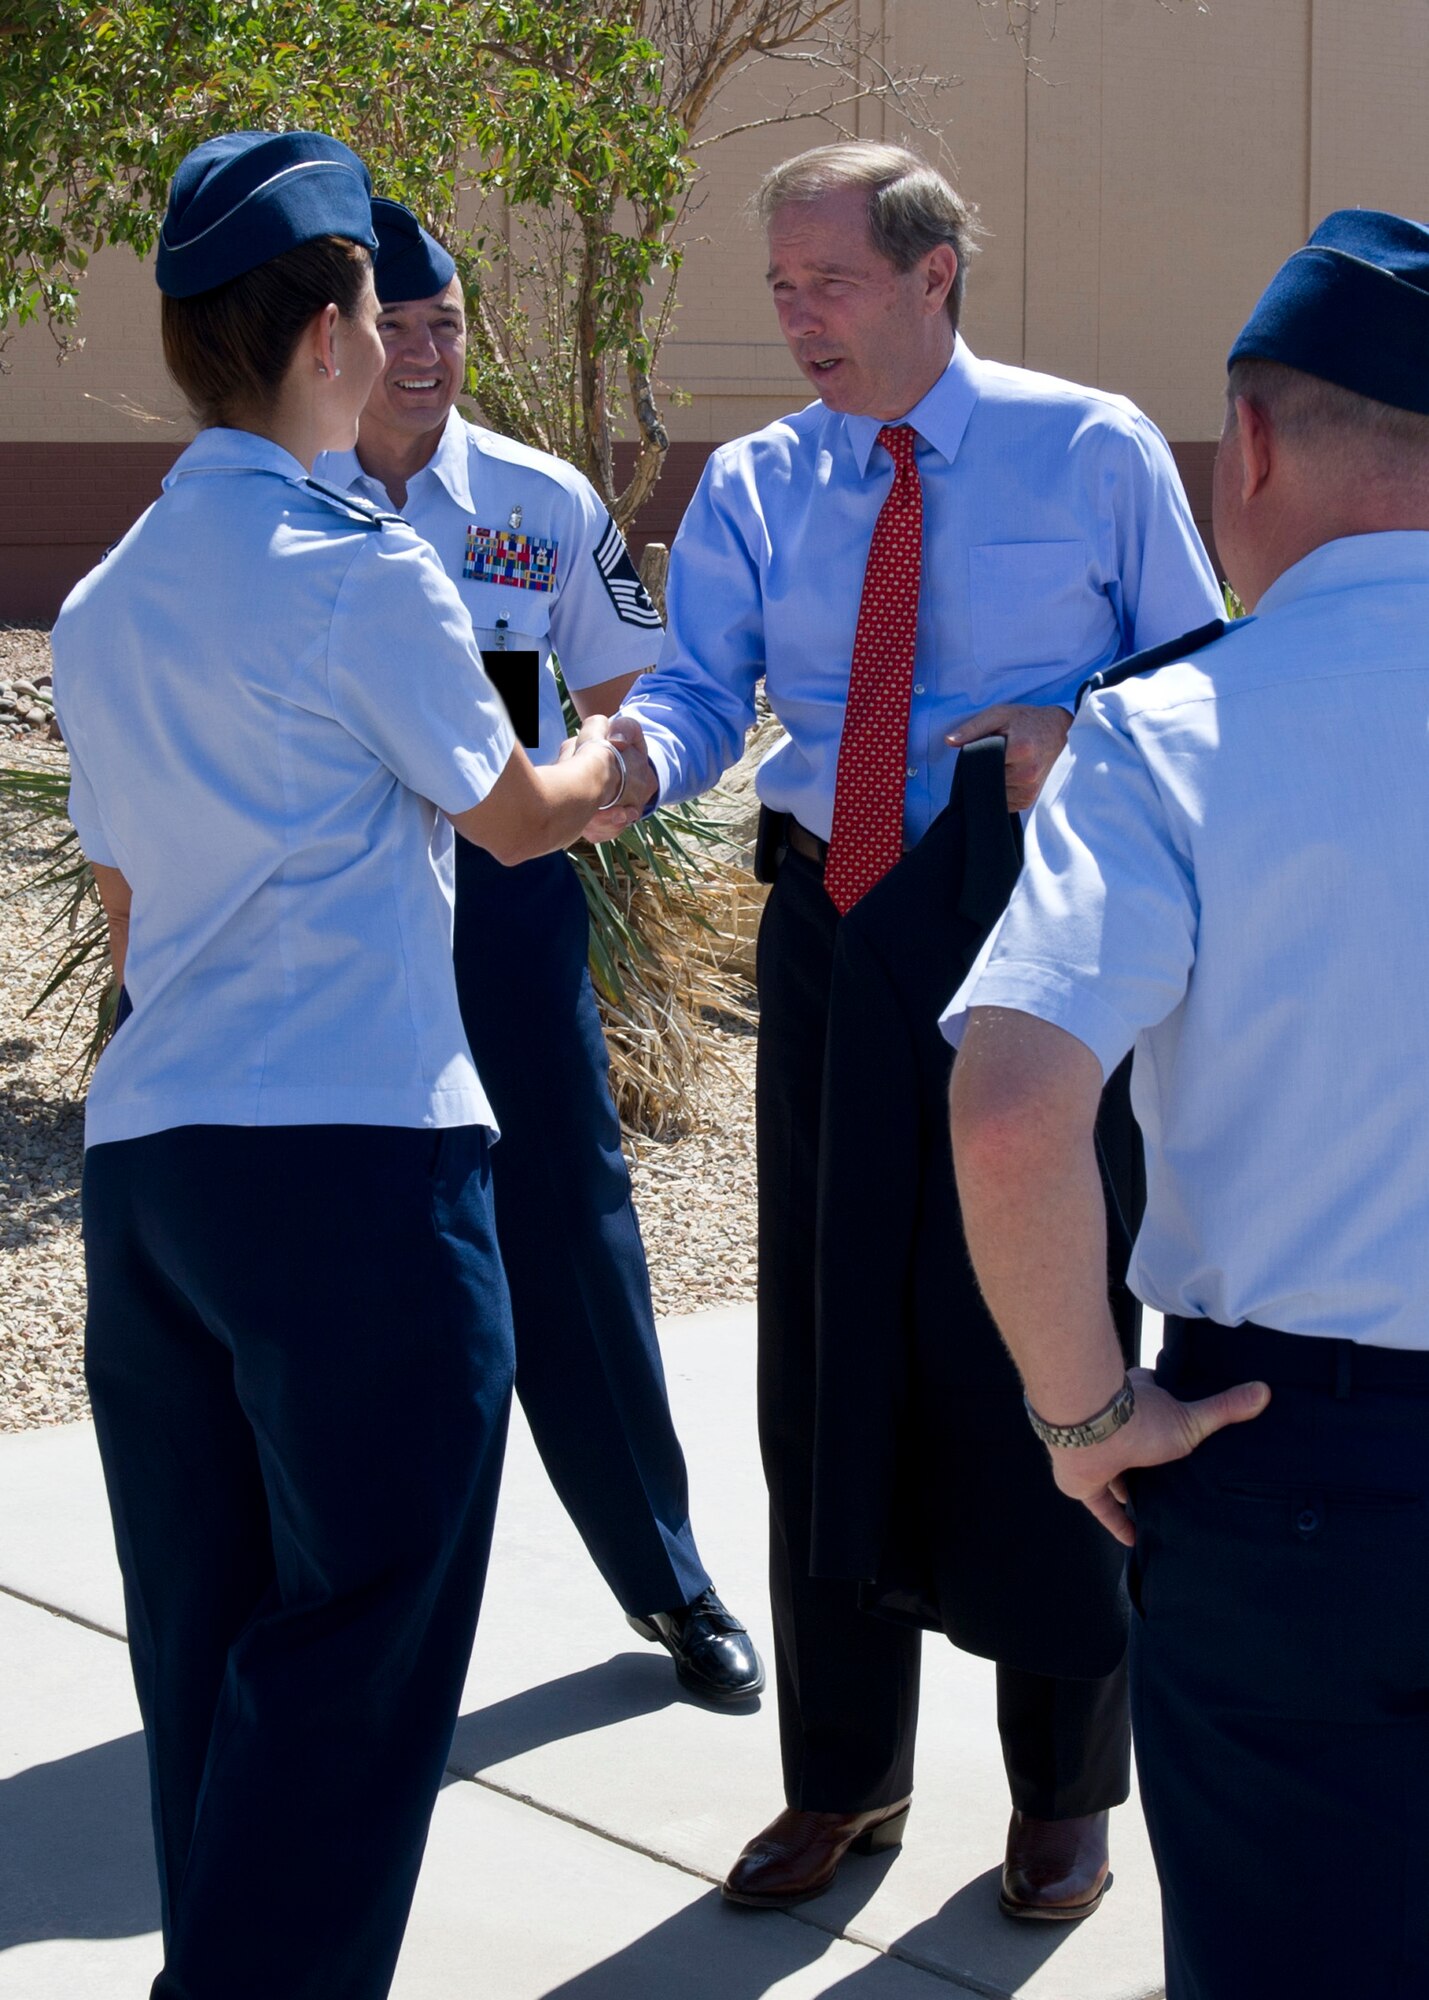 Senator Tom Udall of New Mexico, greets Col. Andrew Croft, 49th Wing commander, Col. Leslie Knight, 49th Medical Group commander, and personnel from the 49th Medical Group command staff after arriving at Holloman Air Force Base, N.M. April 29. Udall visited Holloman AFB to meet with 49th Wing leadership and see how he can help to support the base’s mission. (U.S. Air Force photo by Senior Airman DeAndre Curtiss/Released)